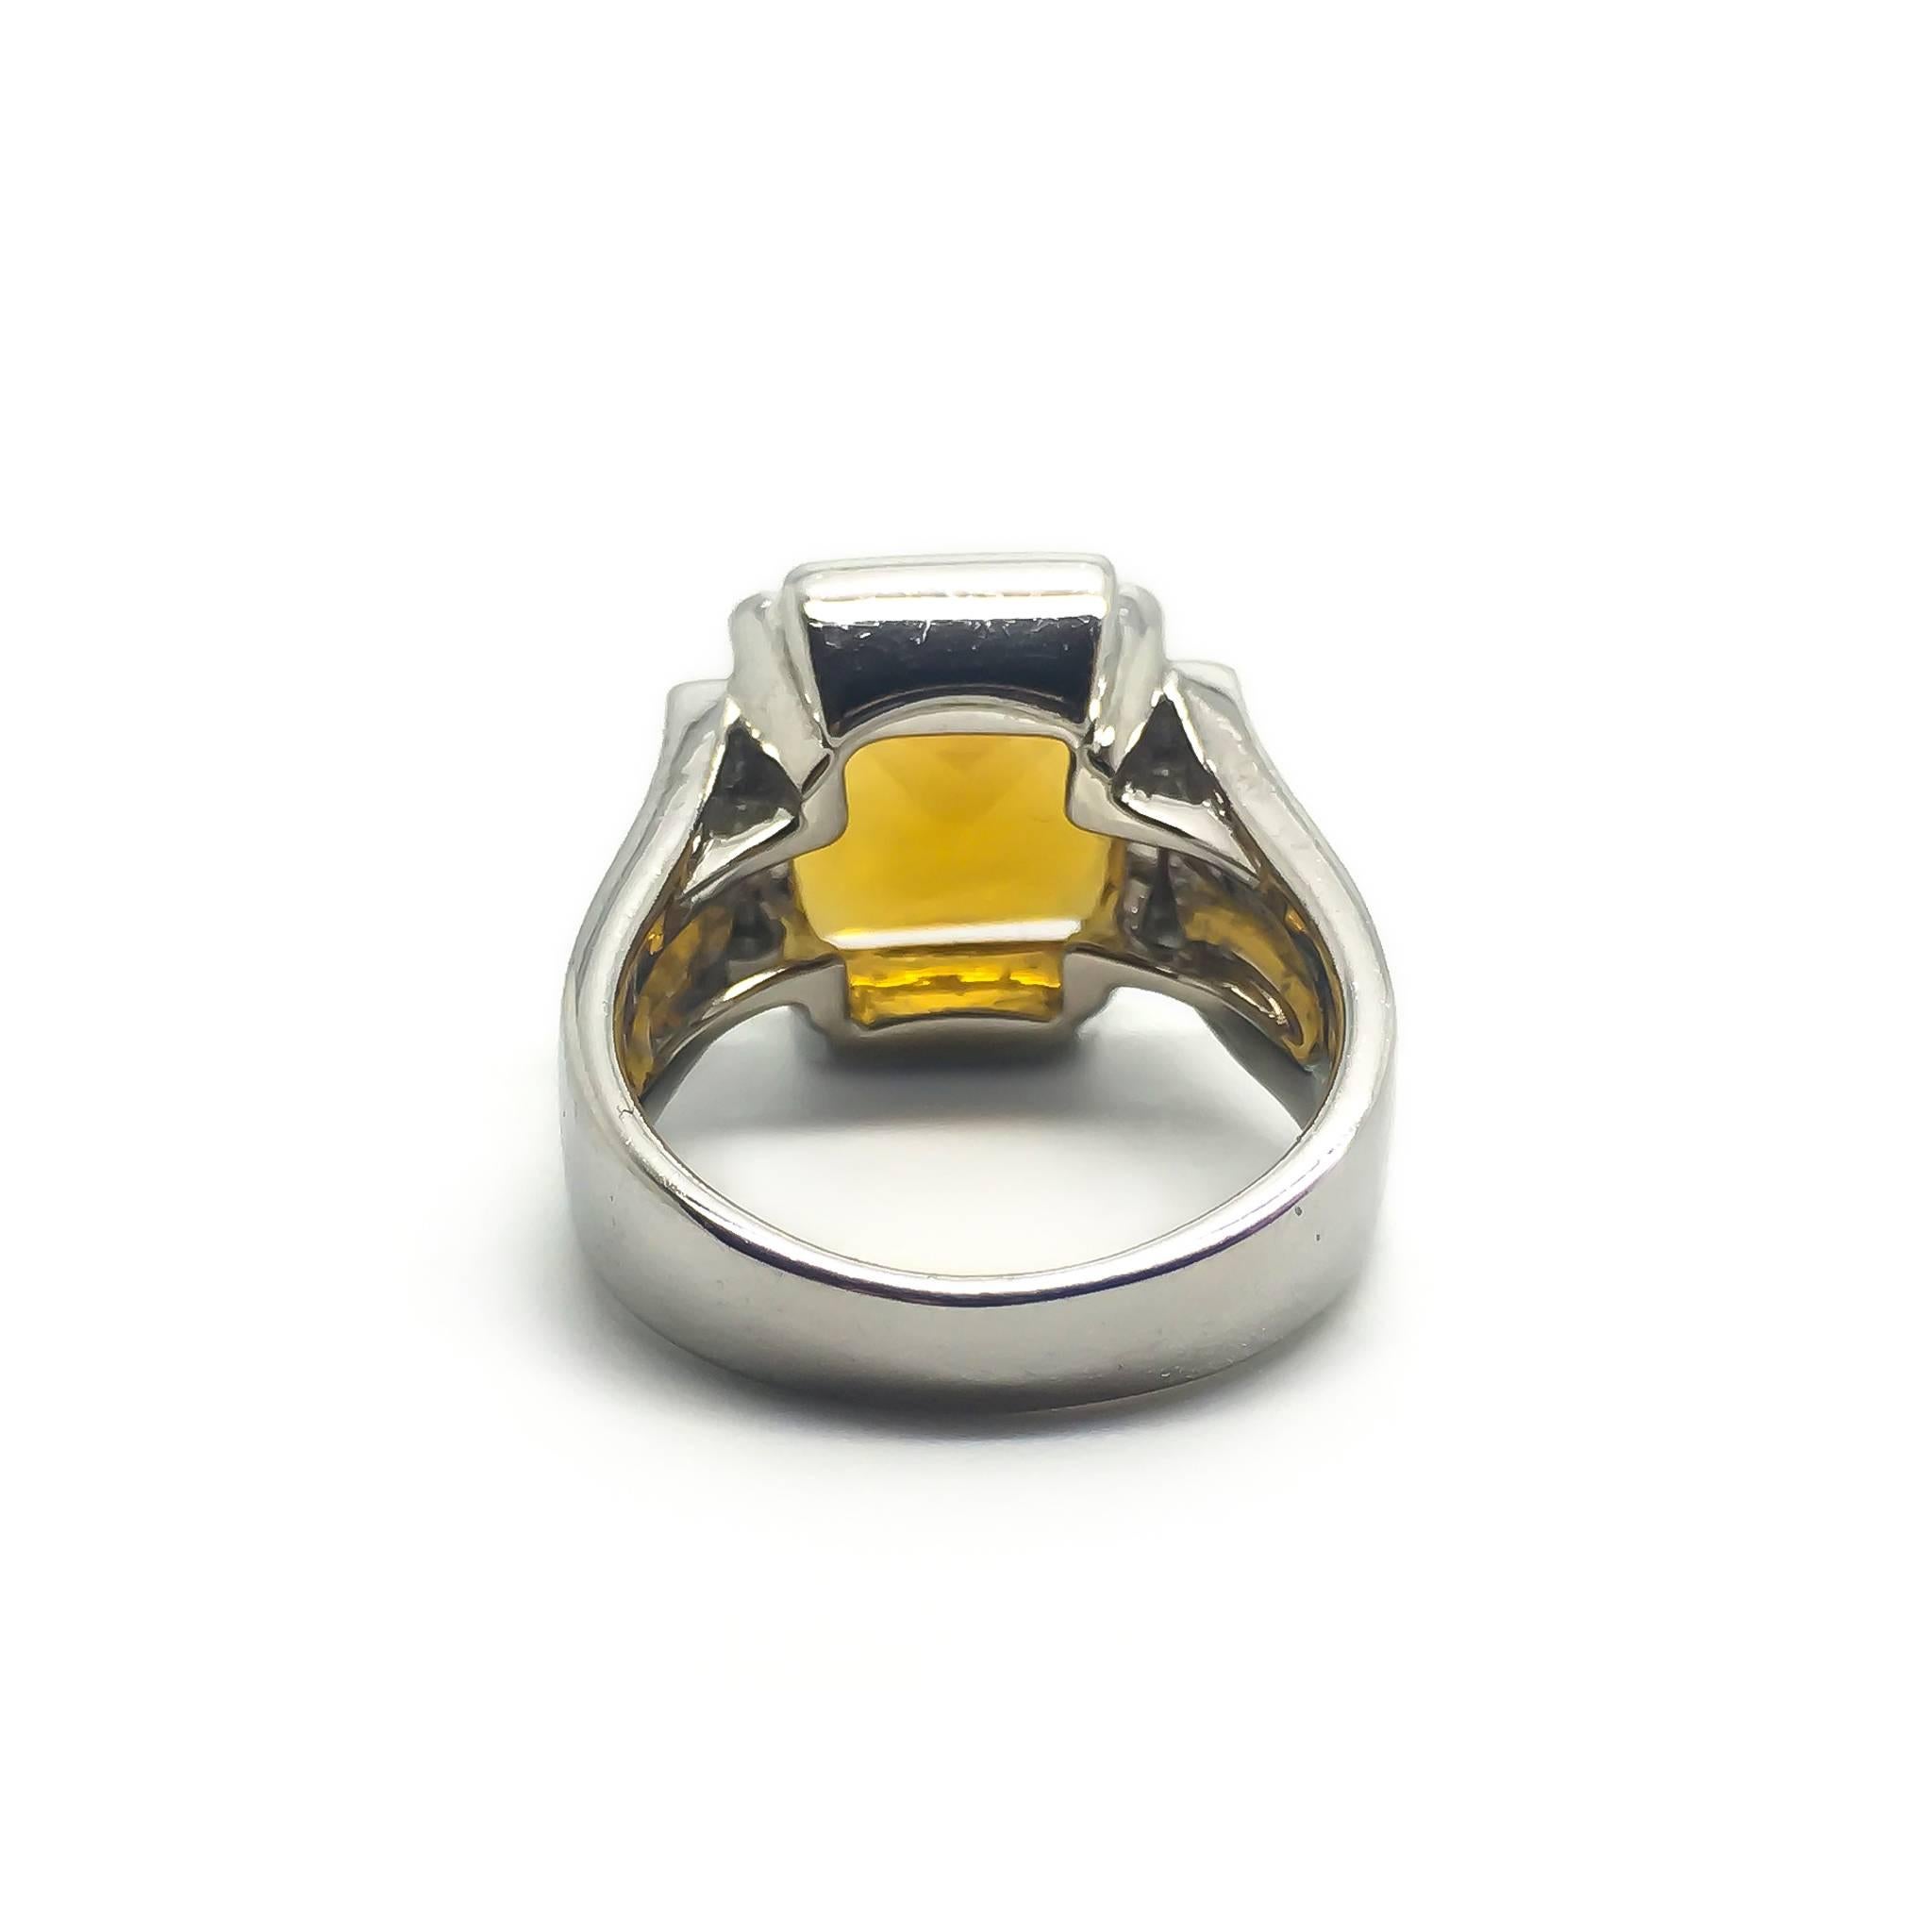 An 18ct White gold ring by Chatila. 

Set with a citrine with diamonds around the centre stone. 

UK size M

US size 6

Citrine is 10.65 x 10.49 x 6.29mm = Approximately 4.45cts

Total diamond weight is approximately 0.32cts.

Signed Chatila. 

12.3g